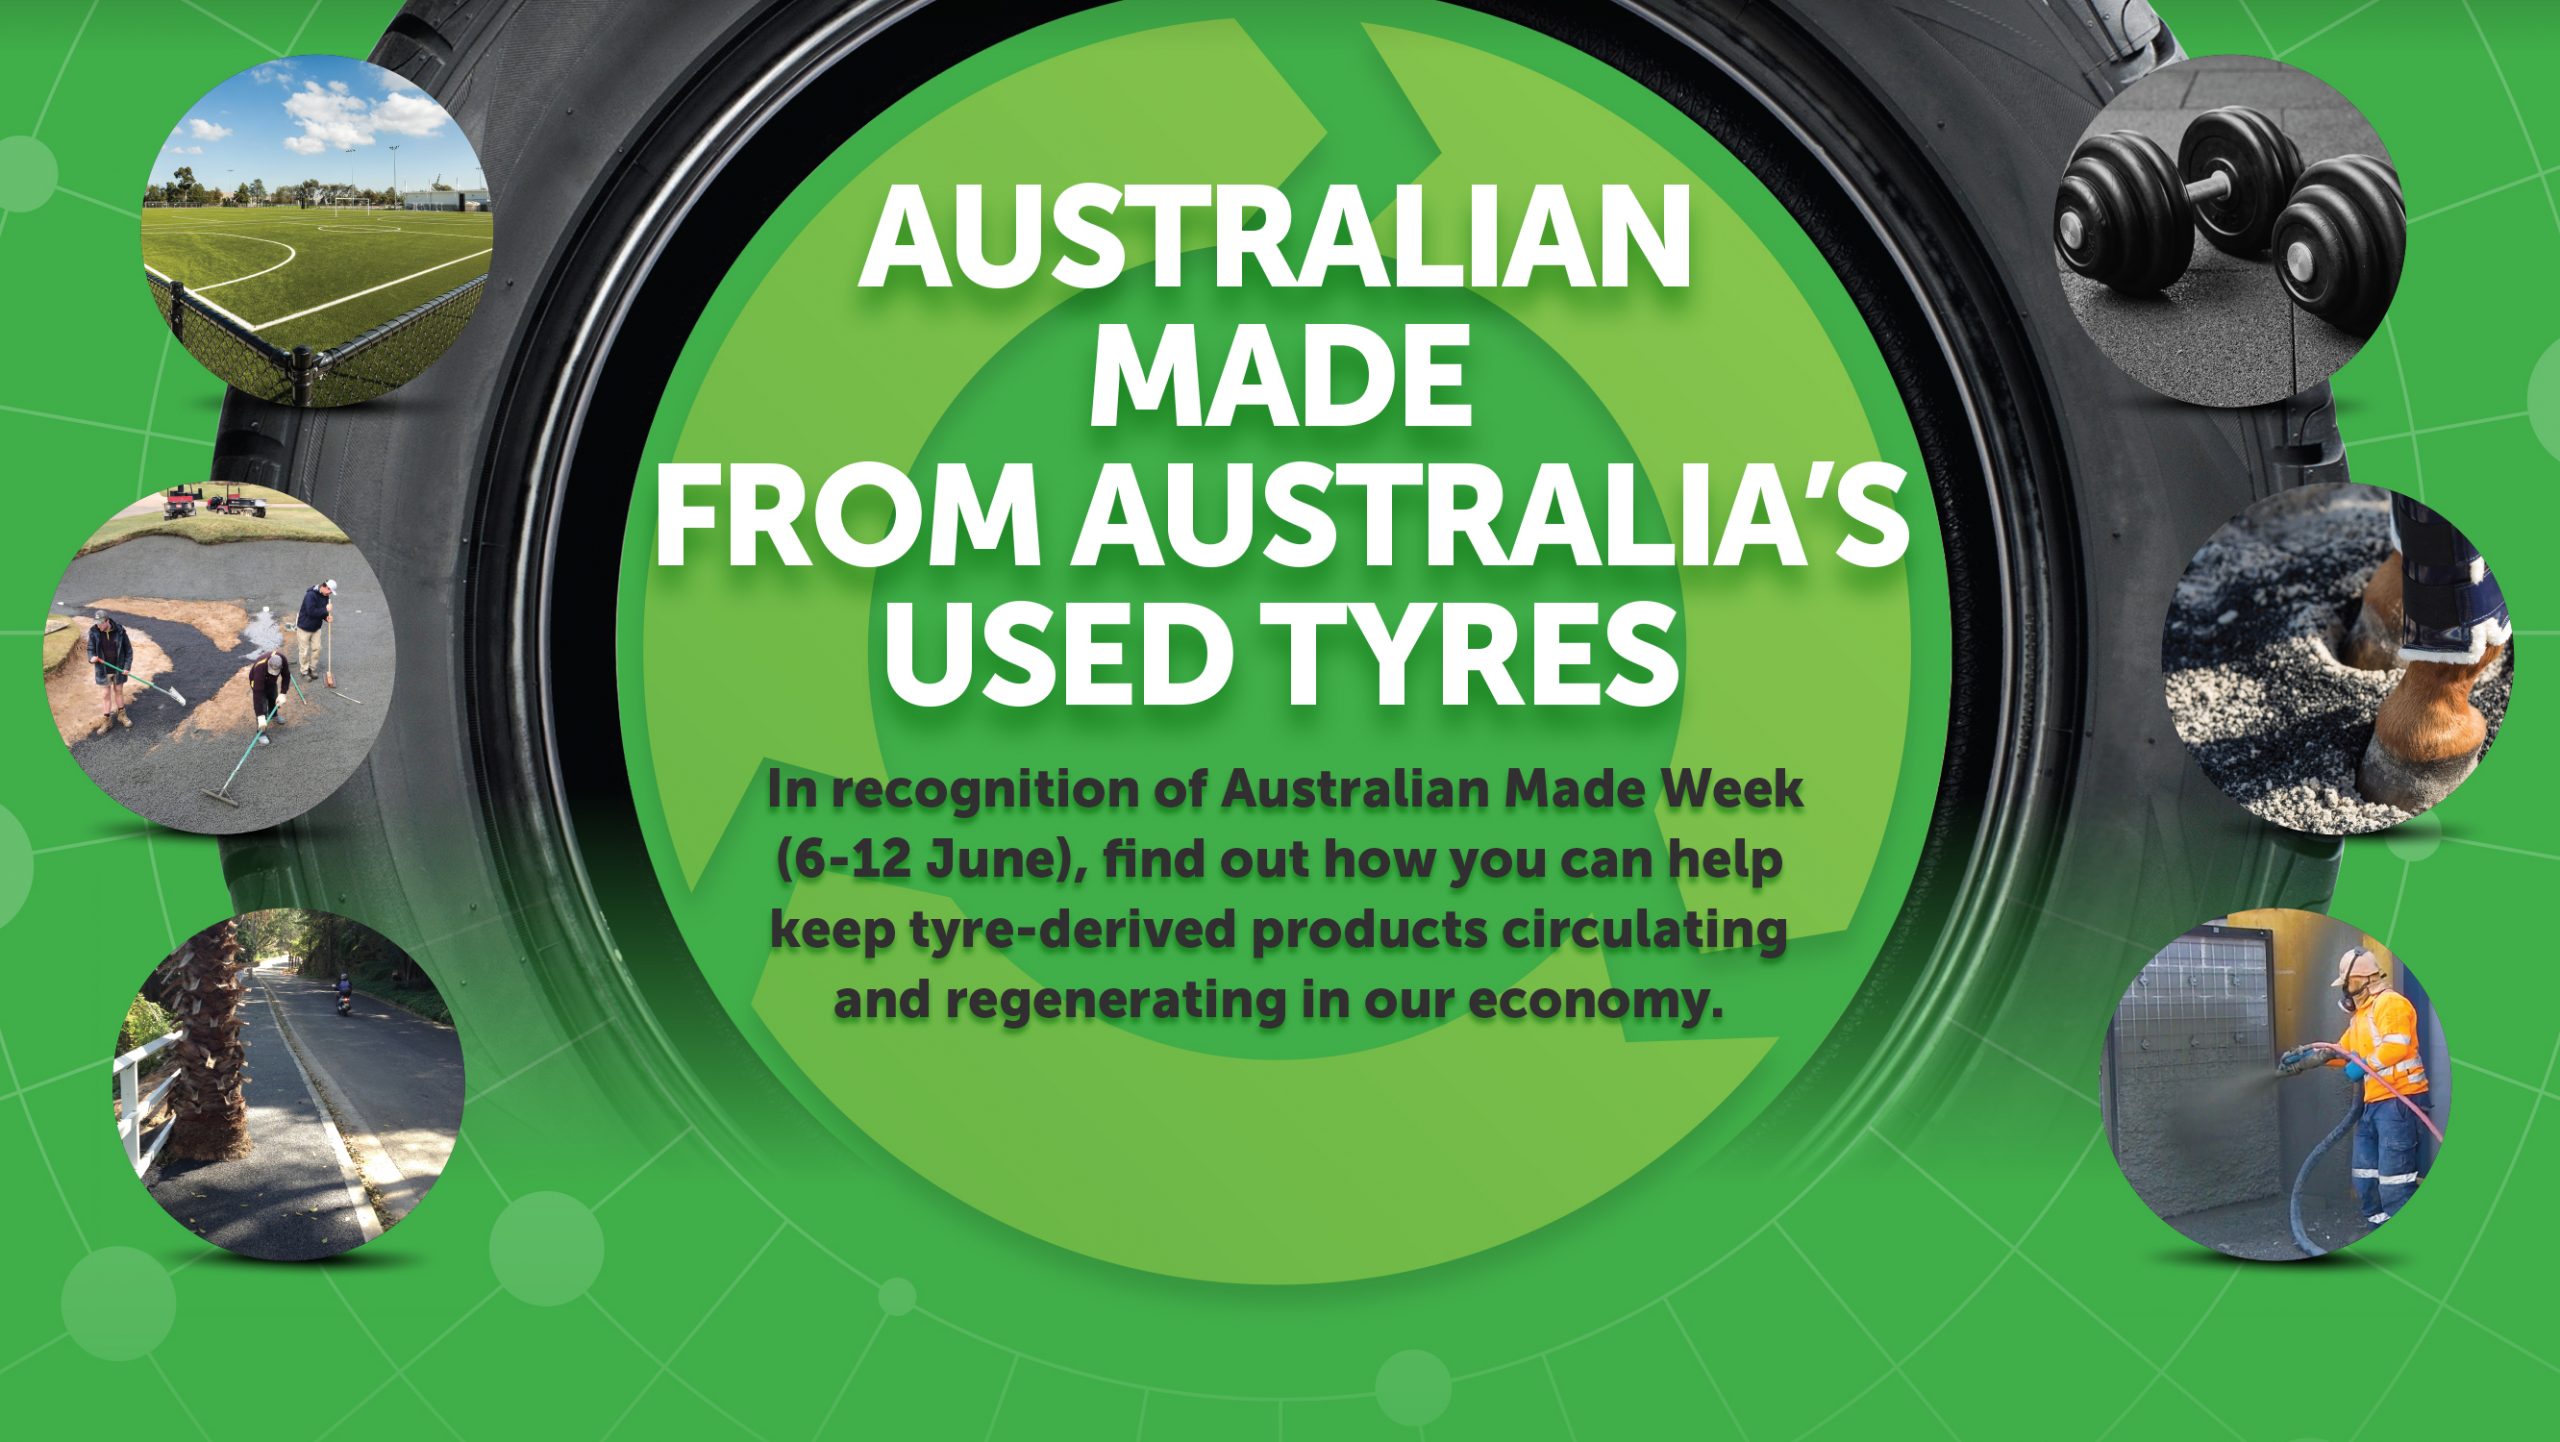 Australian Made From Australia’s Used Tyres